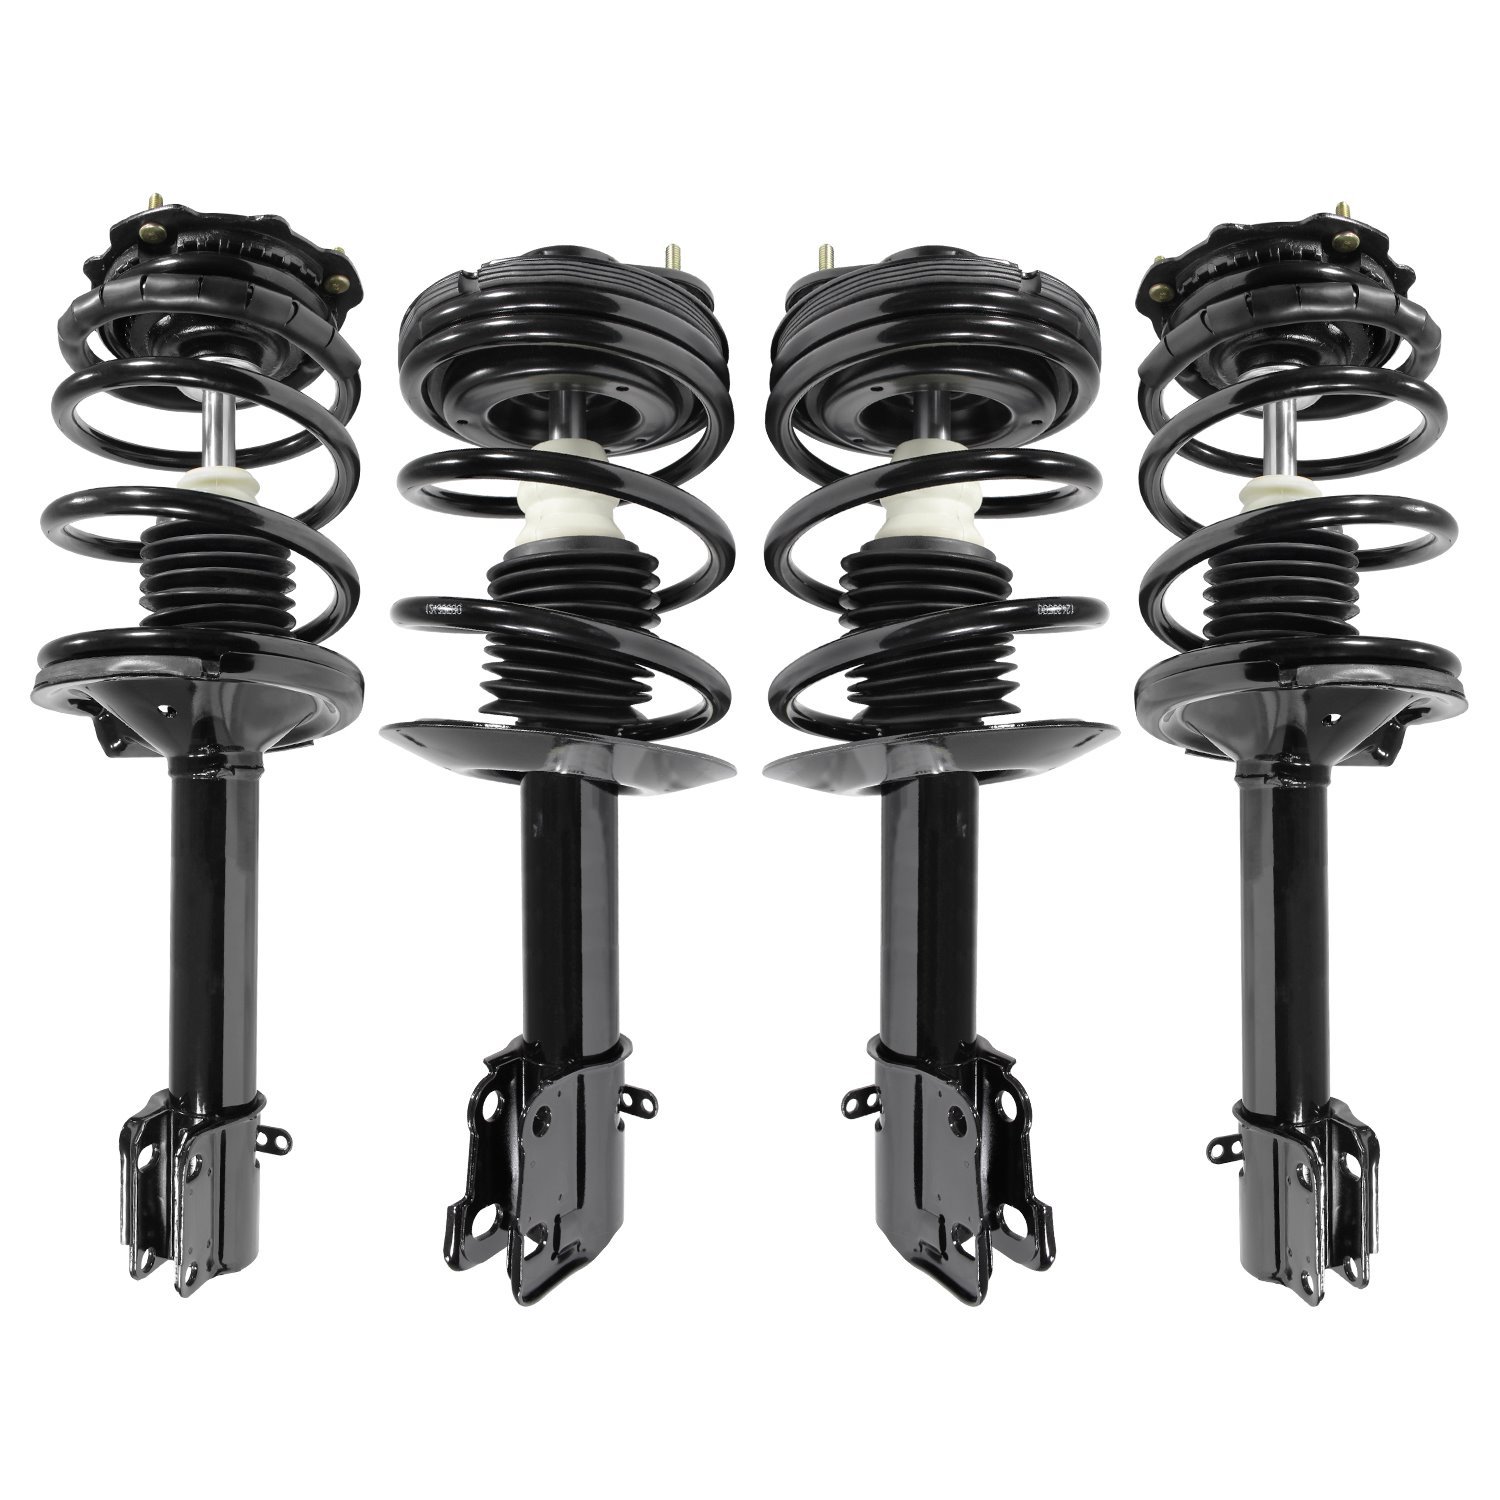 4-11240-15120-001 Front & Rear Suspension Strut & Coil Spring Assembly Kit Fits Select Dodge Neon, Plymouth Neon